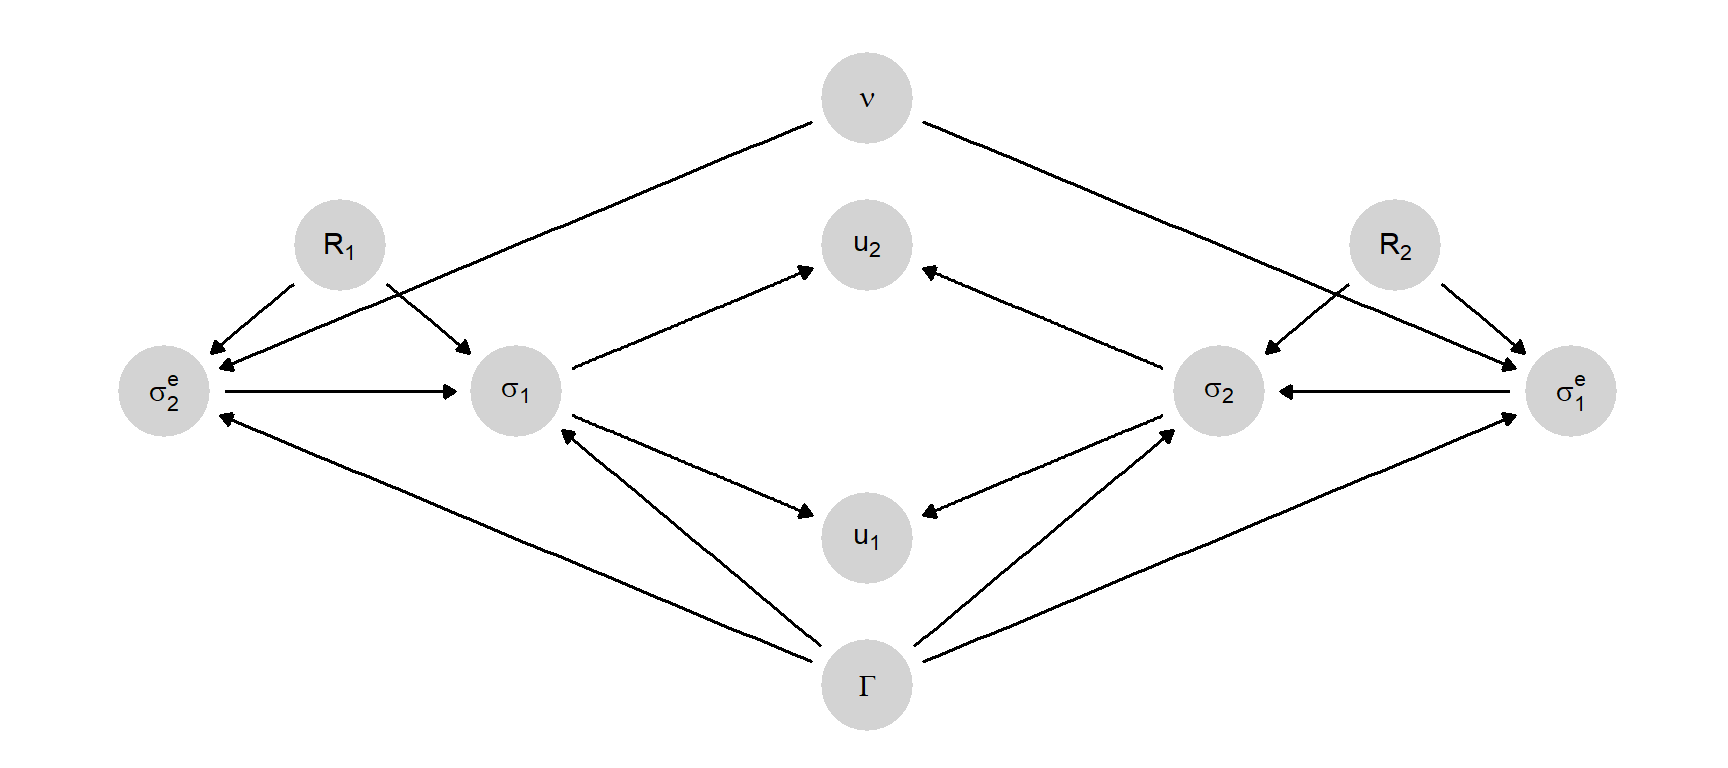 A normal form game with a representation of equilibrium selection norms.